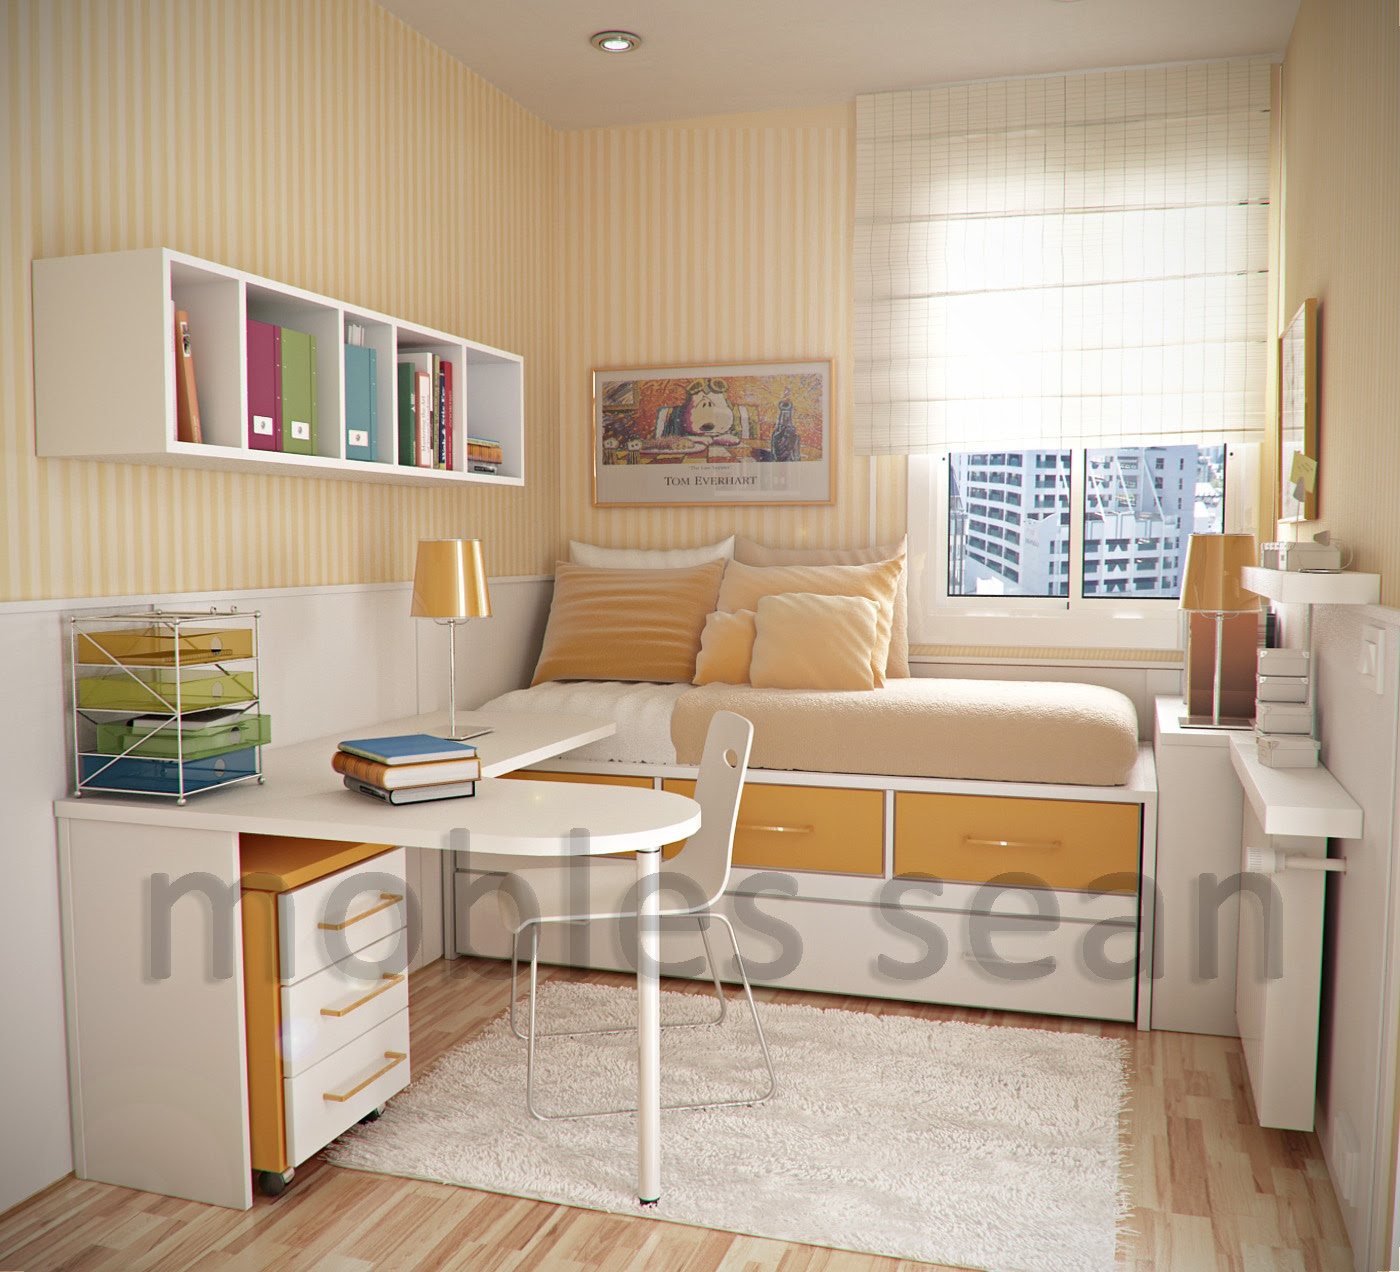 designs for small kids rooms expanding a small space is